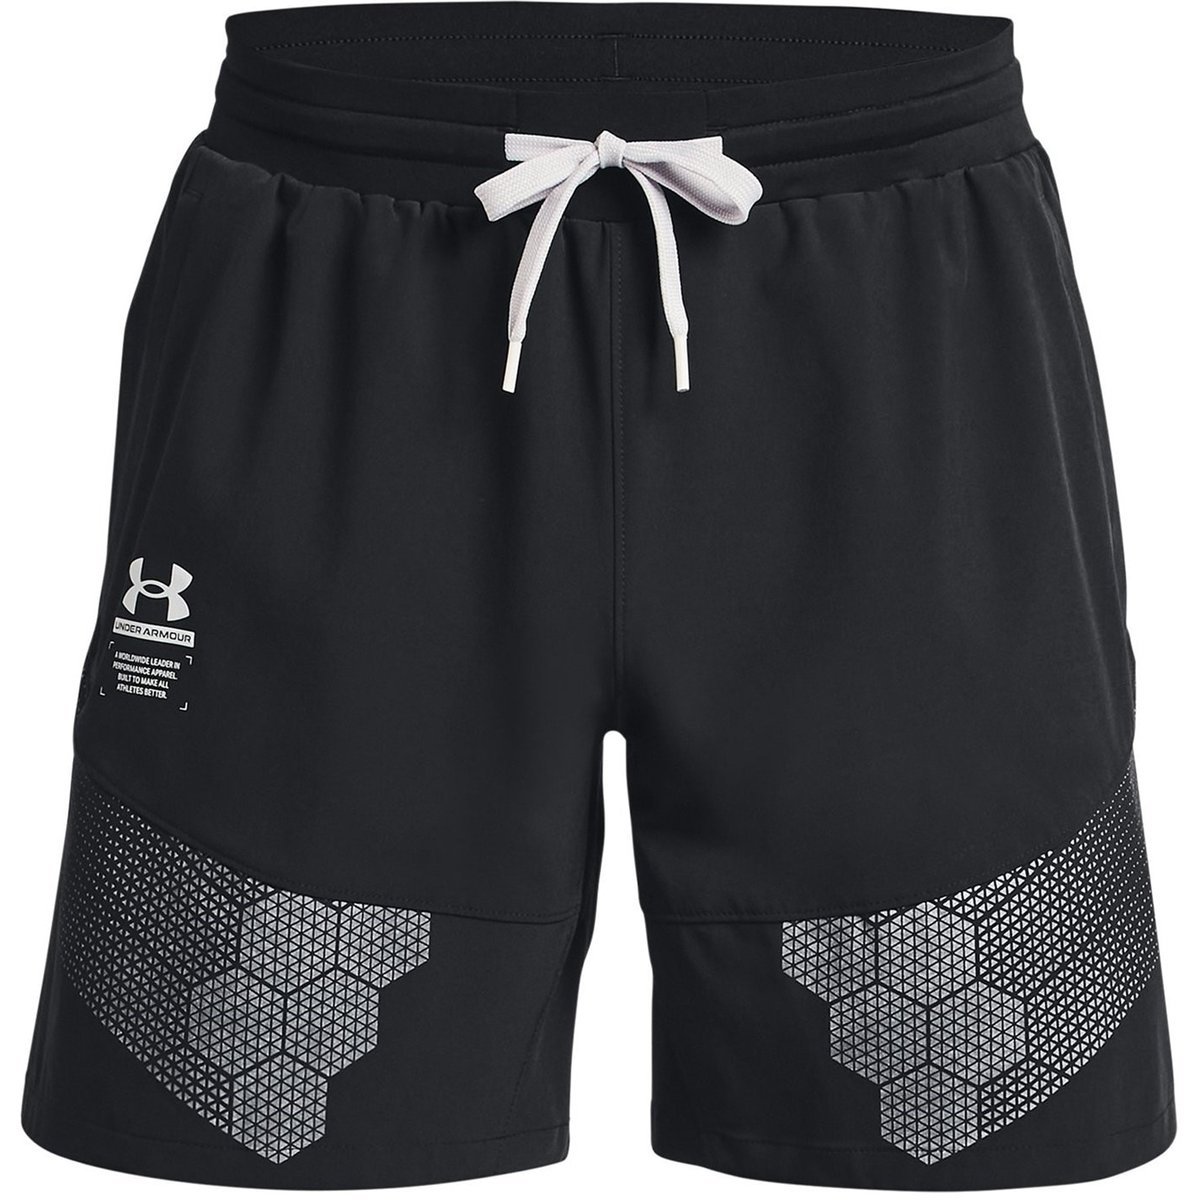 Under Armour, Woven Shorts Mens